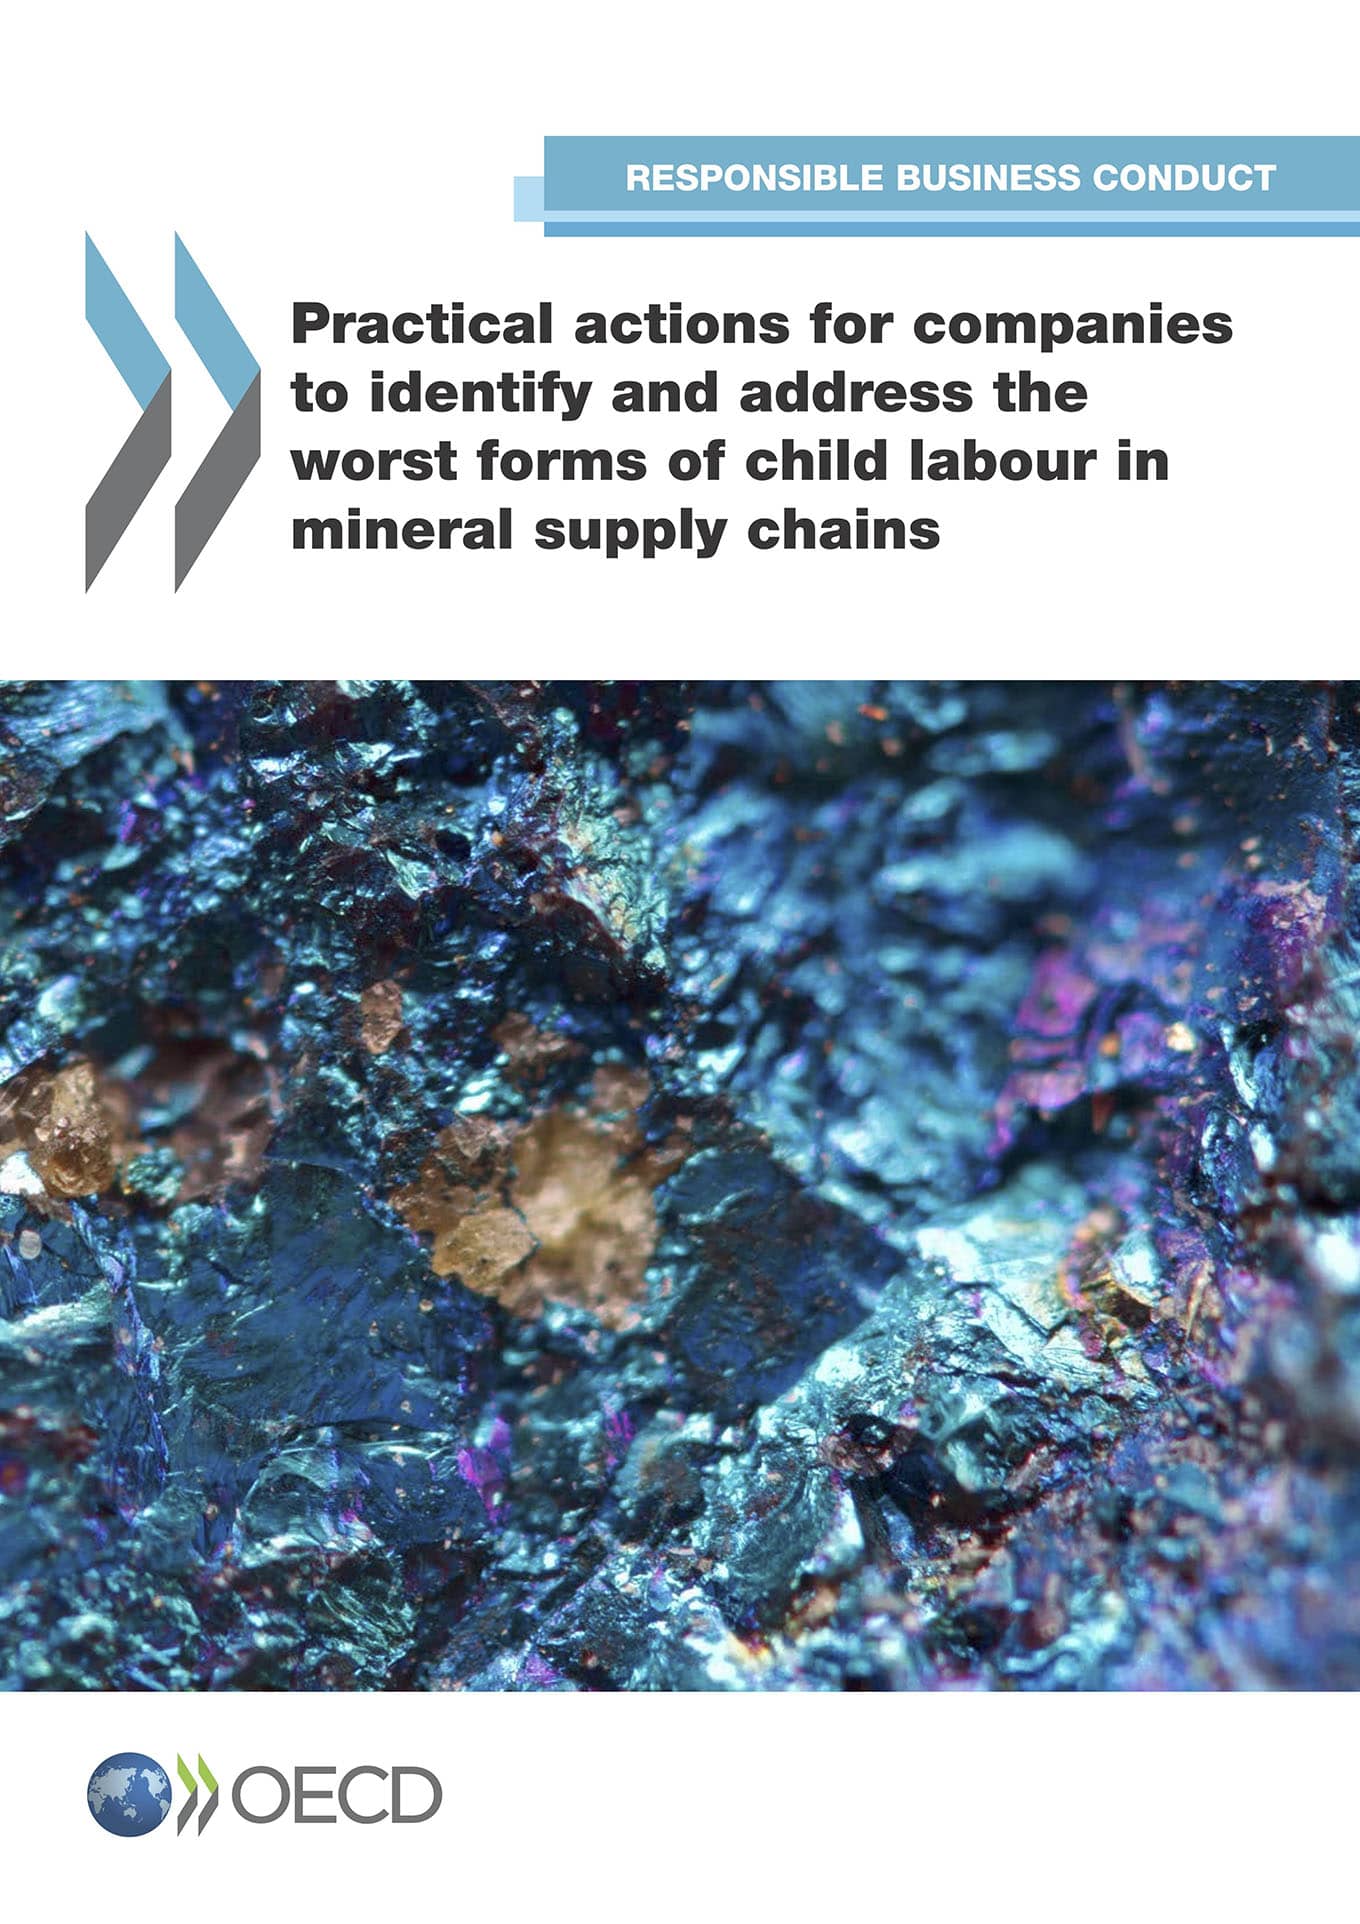 Practical actions for companies to identify and address the worst forms of child labour in mineral supply chains (OECD, 2017)